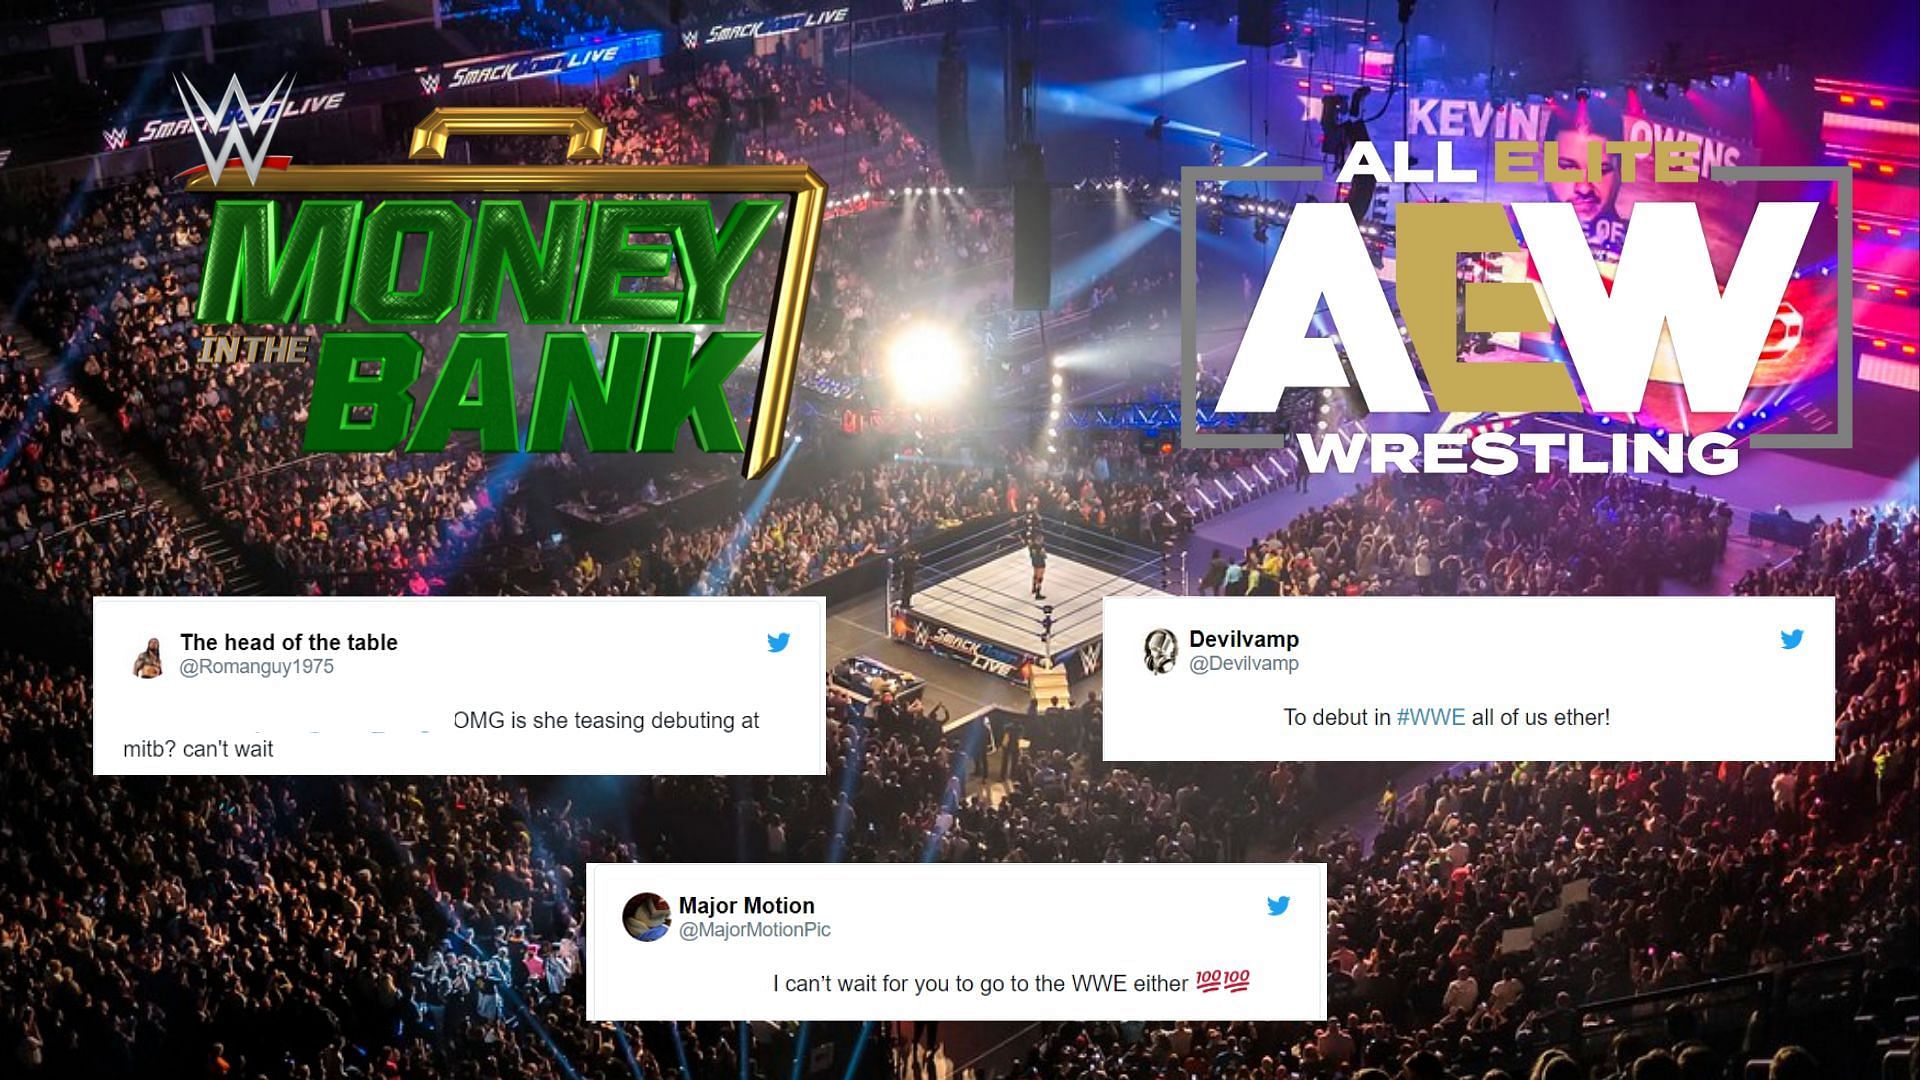 WWE Money in the Bank is set to happen on July 2, 2023 at O2 Arena in London